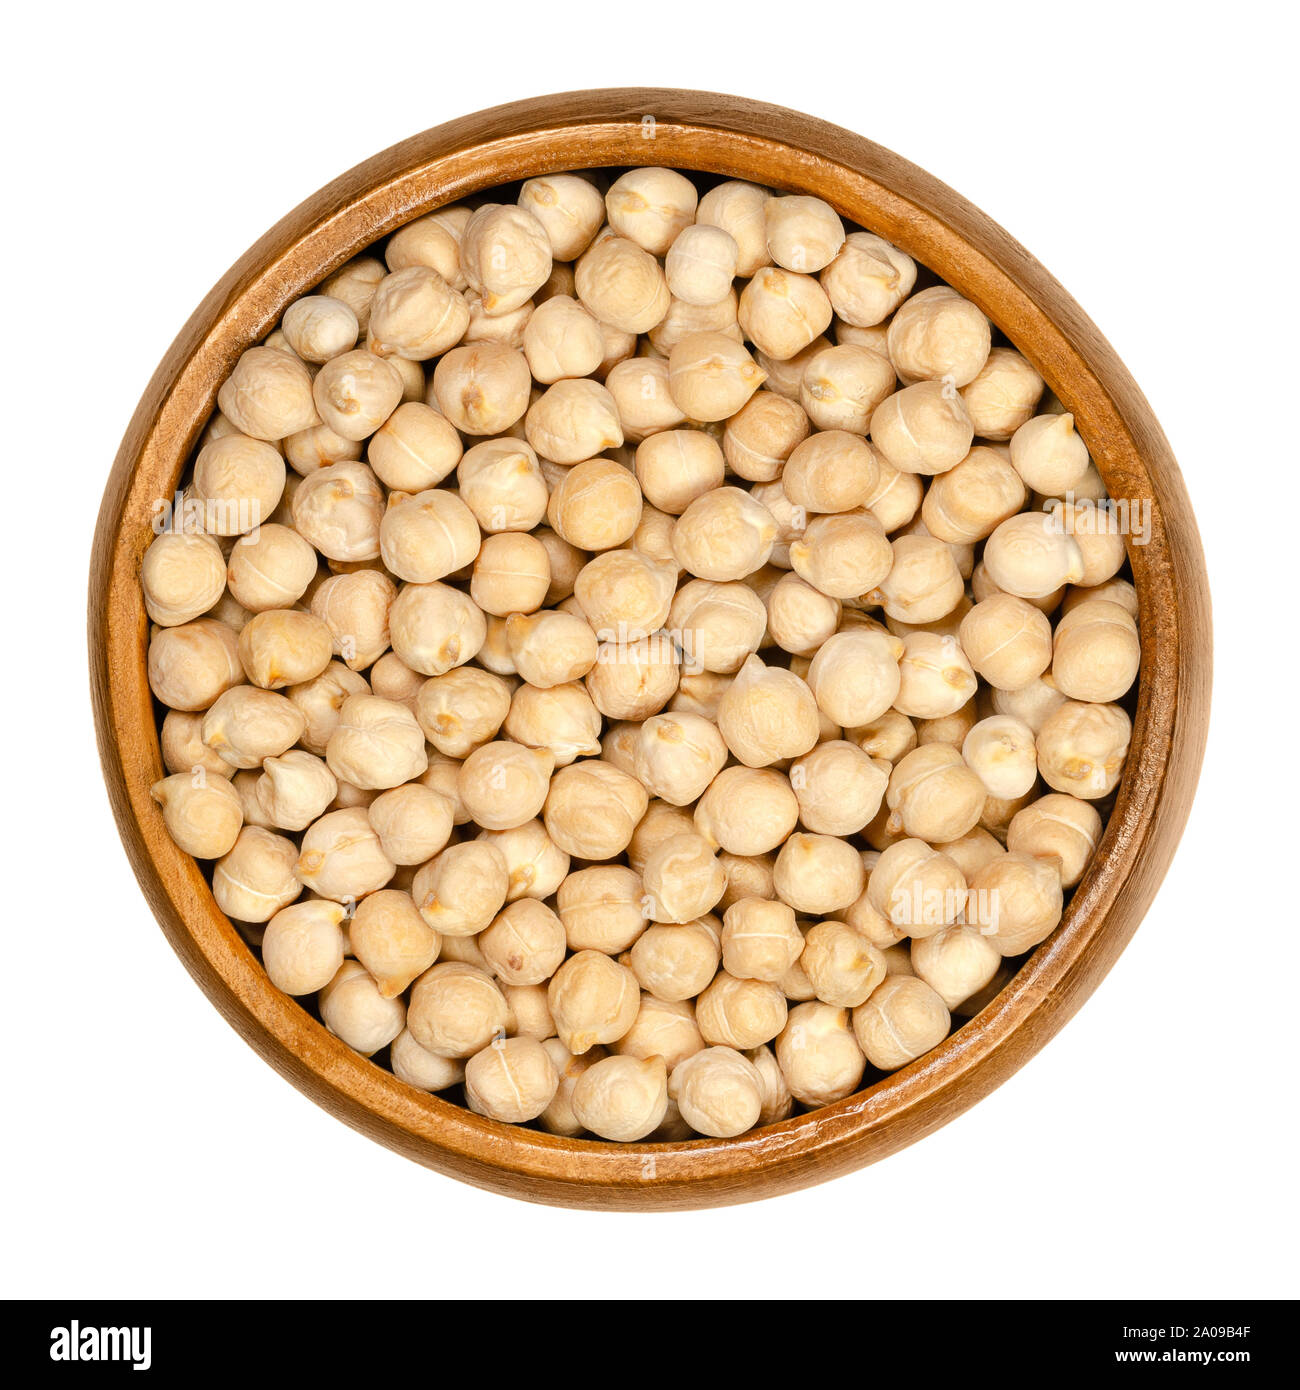 Dried chickpeas in wooden bowl. Light tan Kabuli chickpea variety. Chick peas, Cicer arietinum, high protein legume and ingredient of hummus. Stock Photo